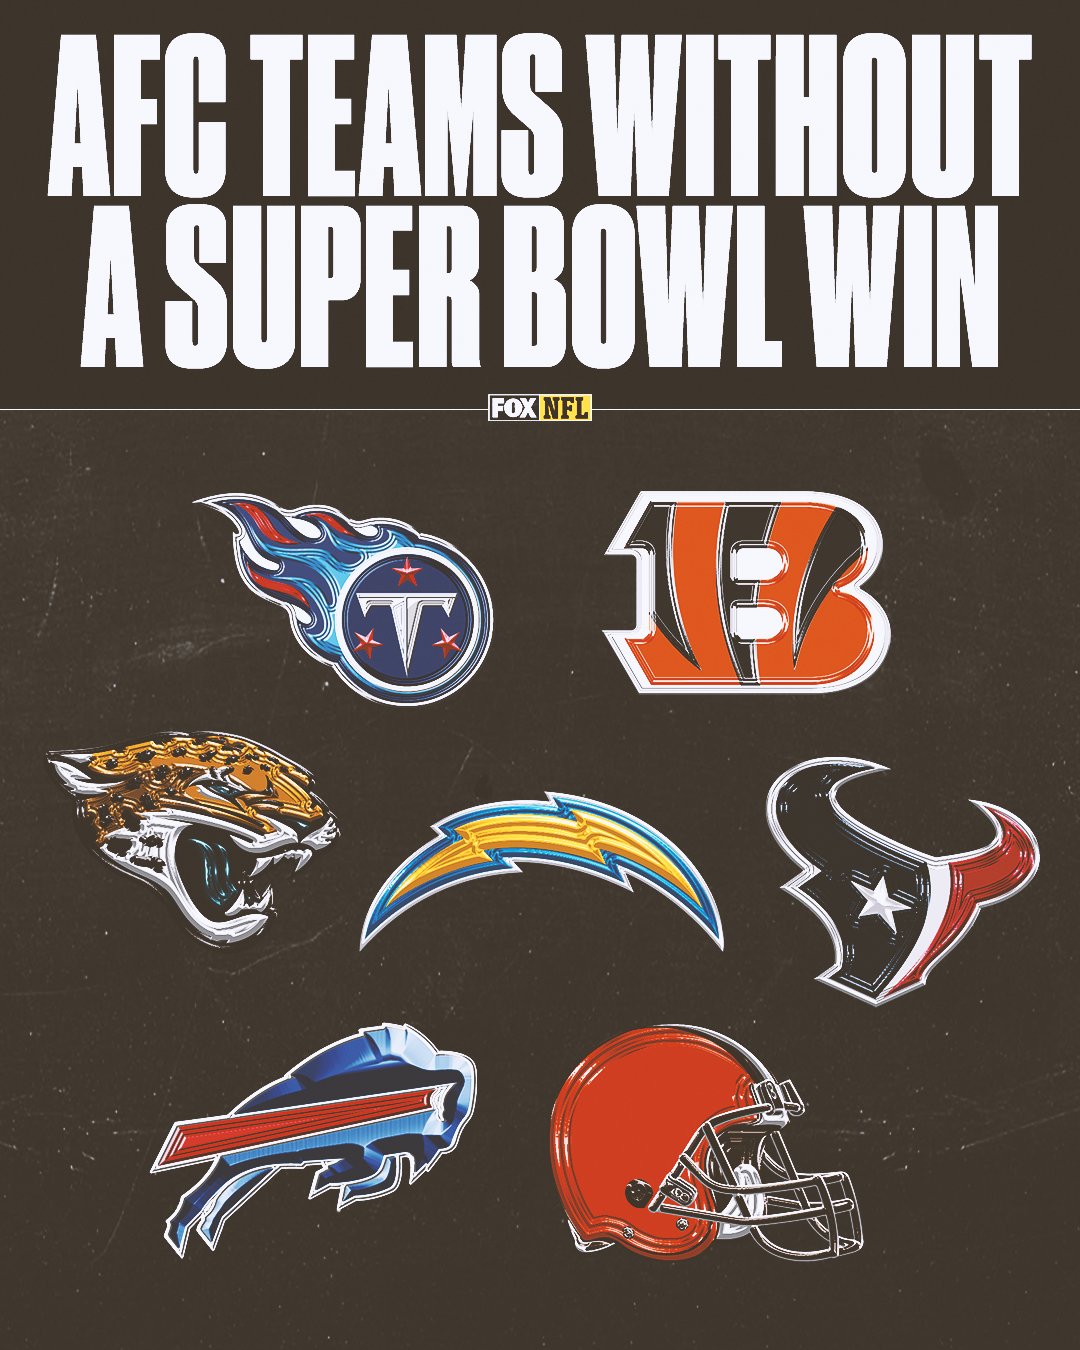 which team will win the super bowl 2022